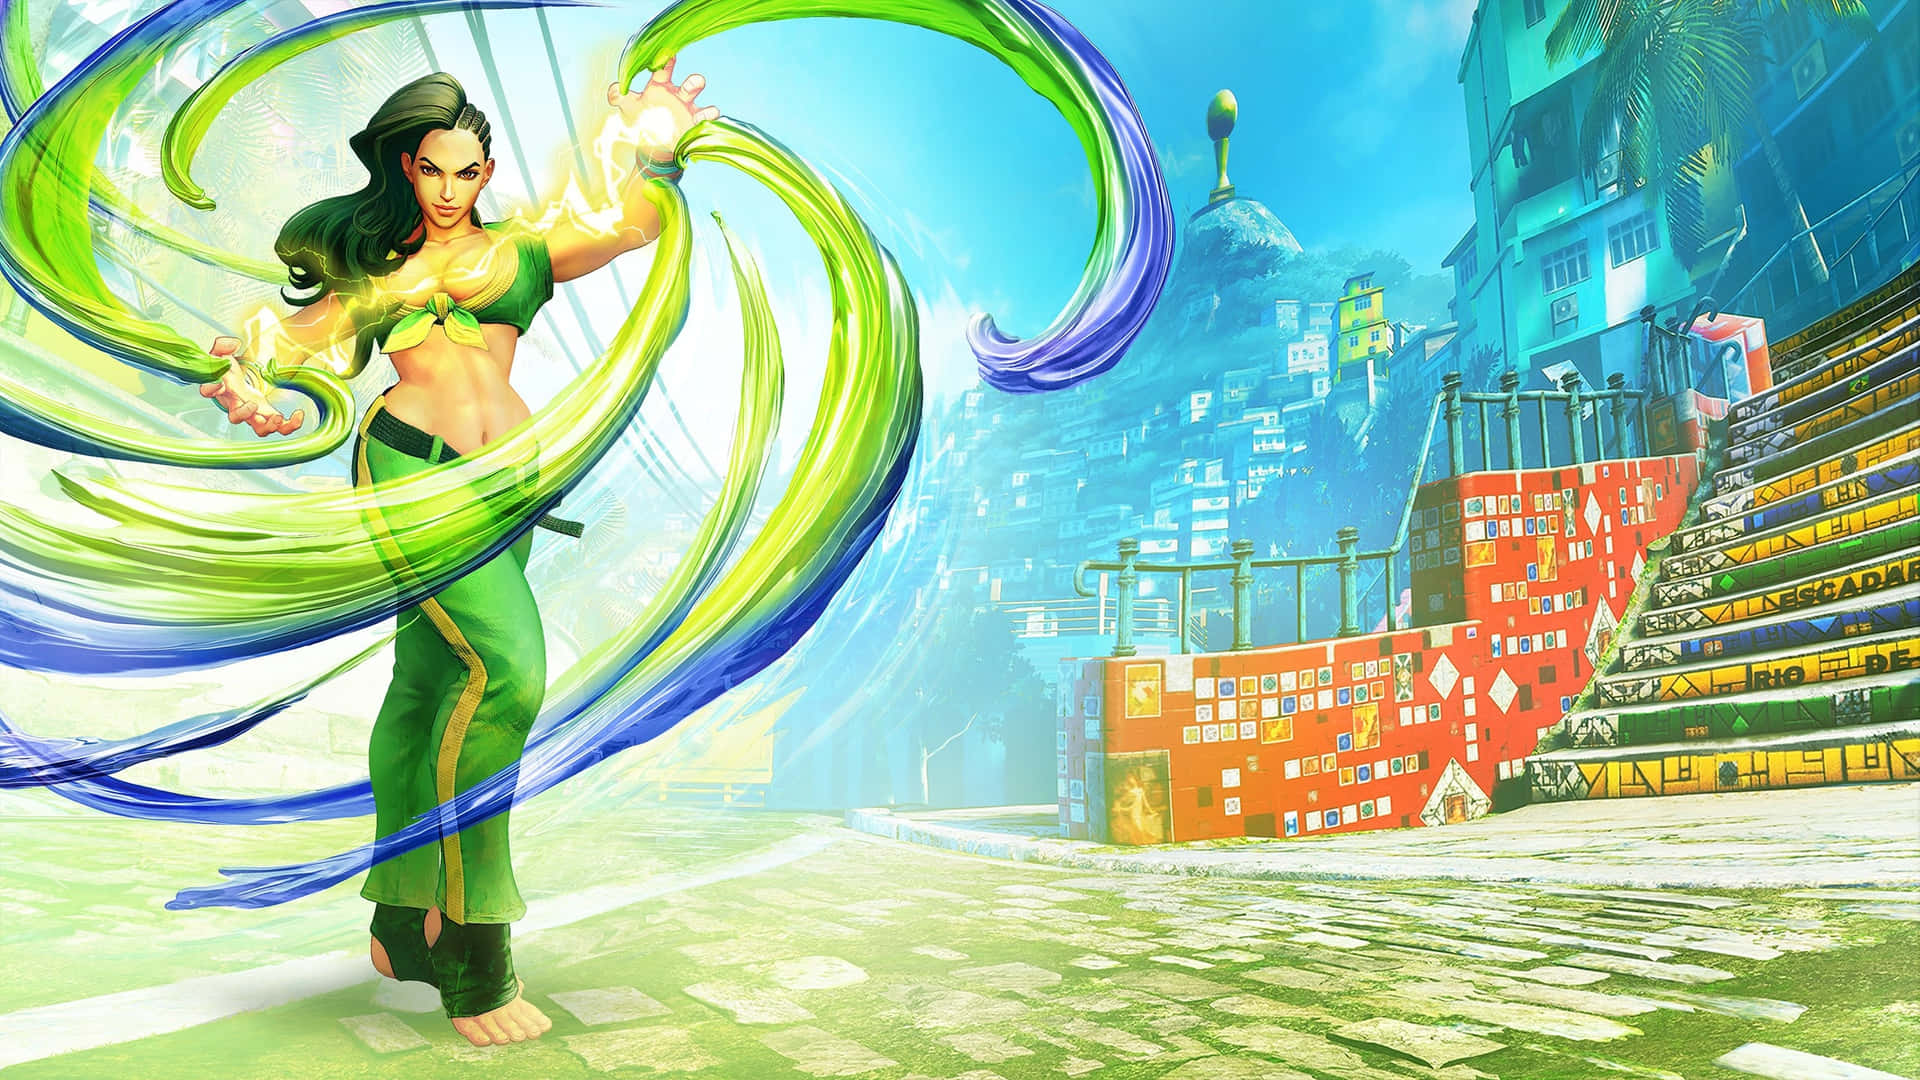 Street Fighter Characters in Action Wallpaper